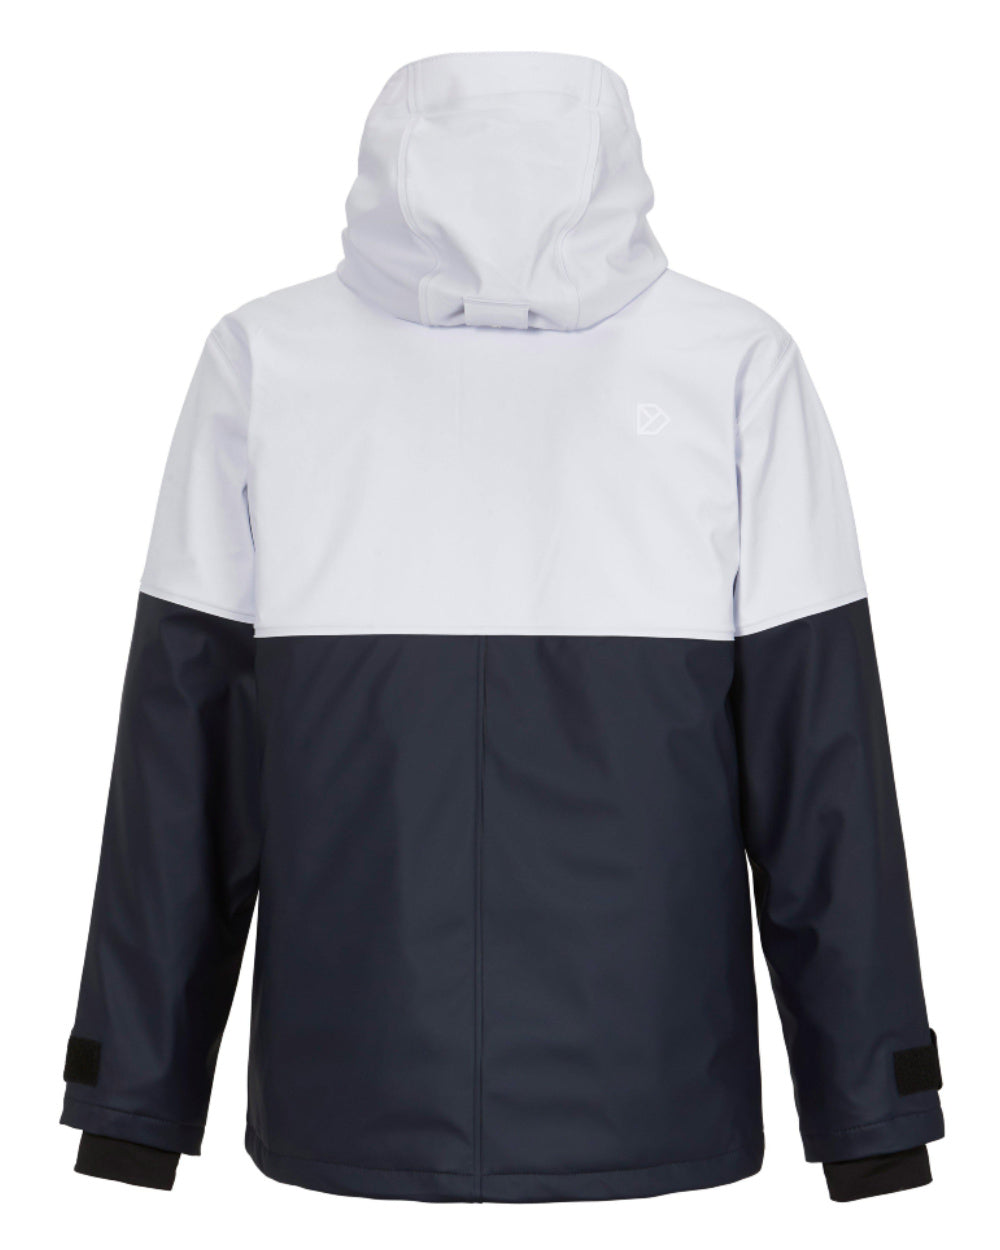 Multicolour Coloured Didriksons Orust Jacket On A White Background 